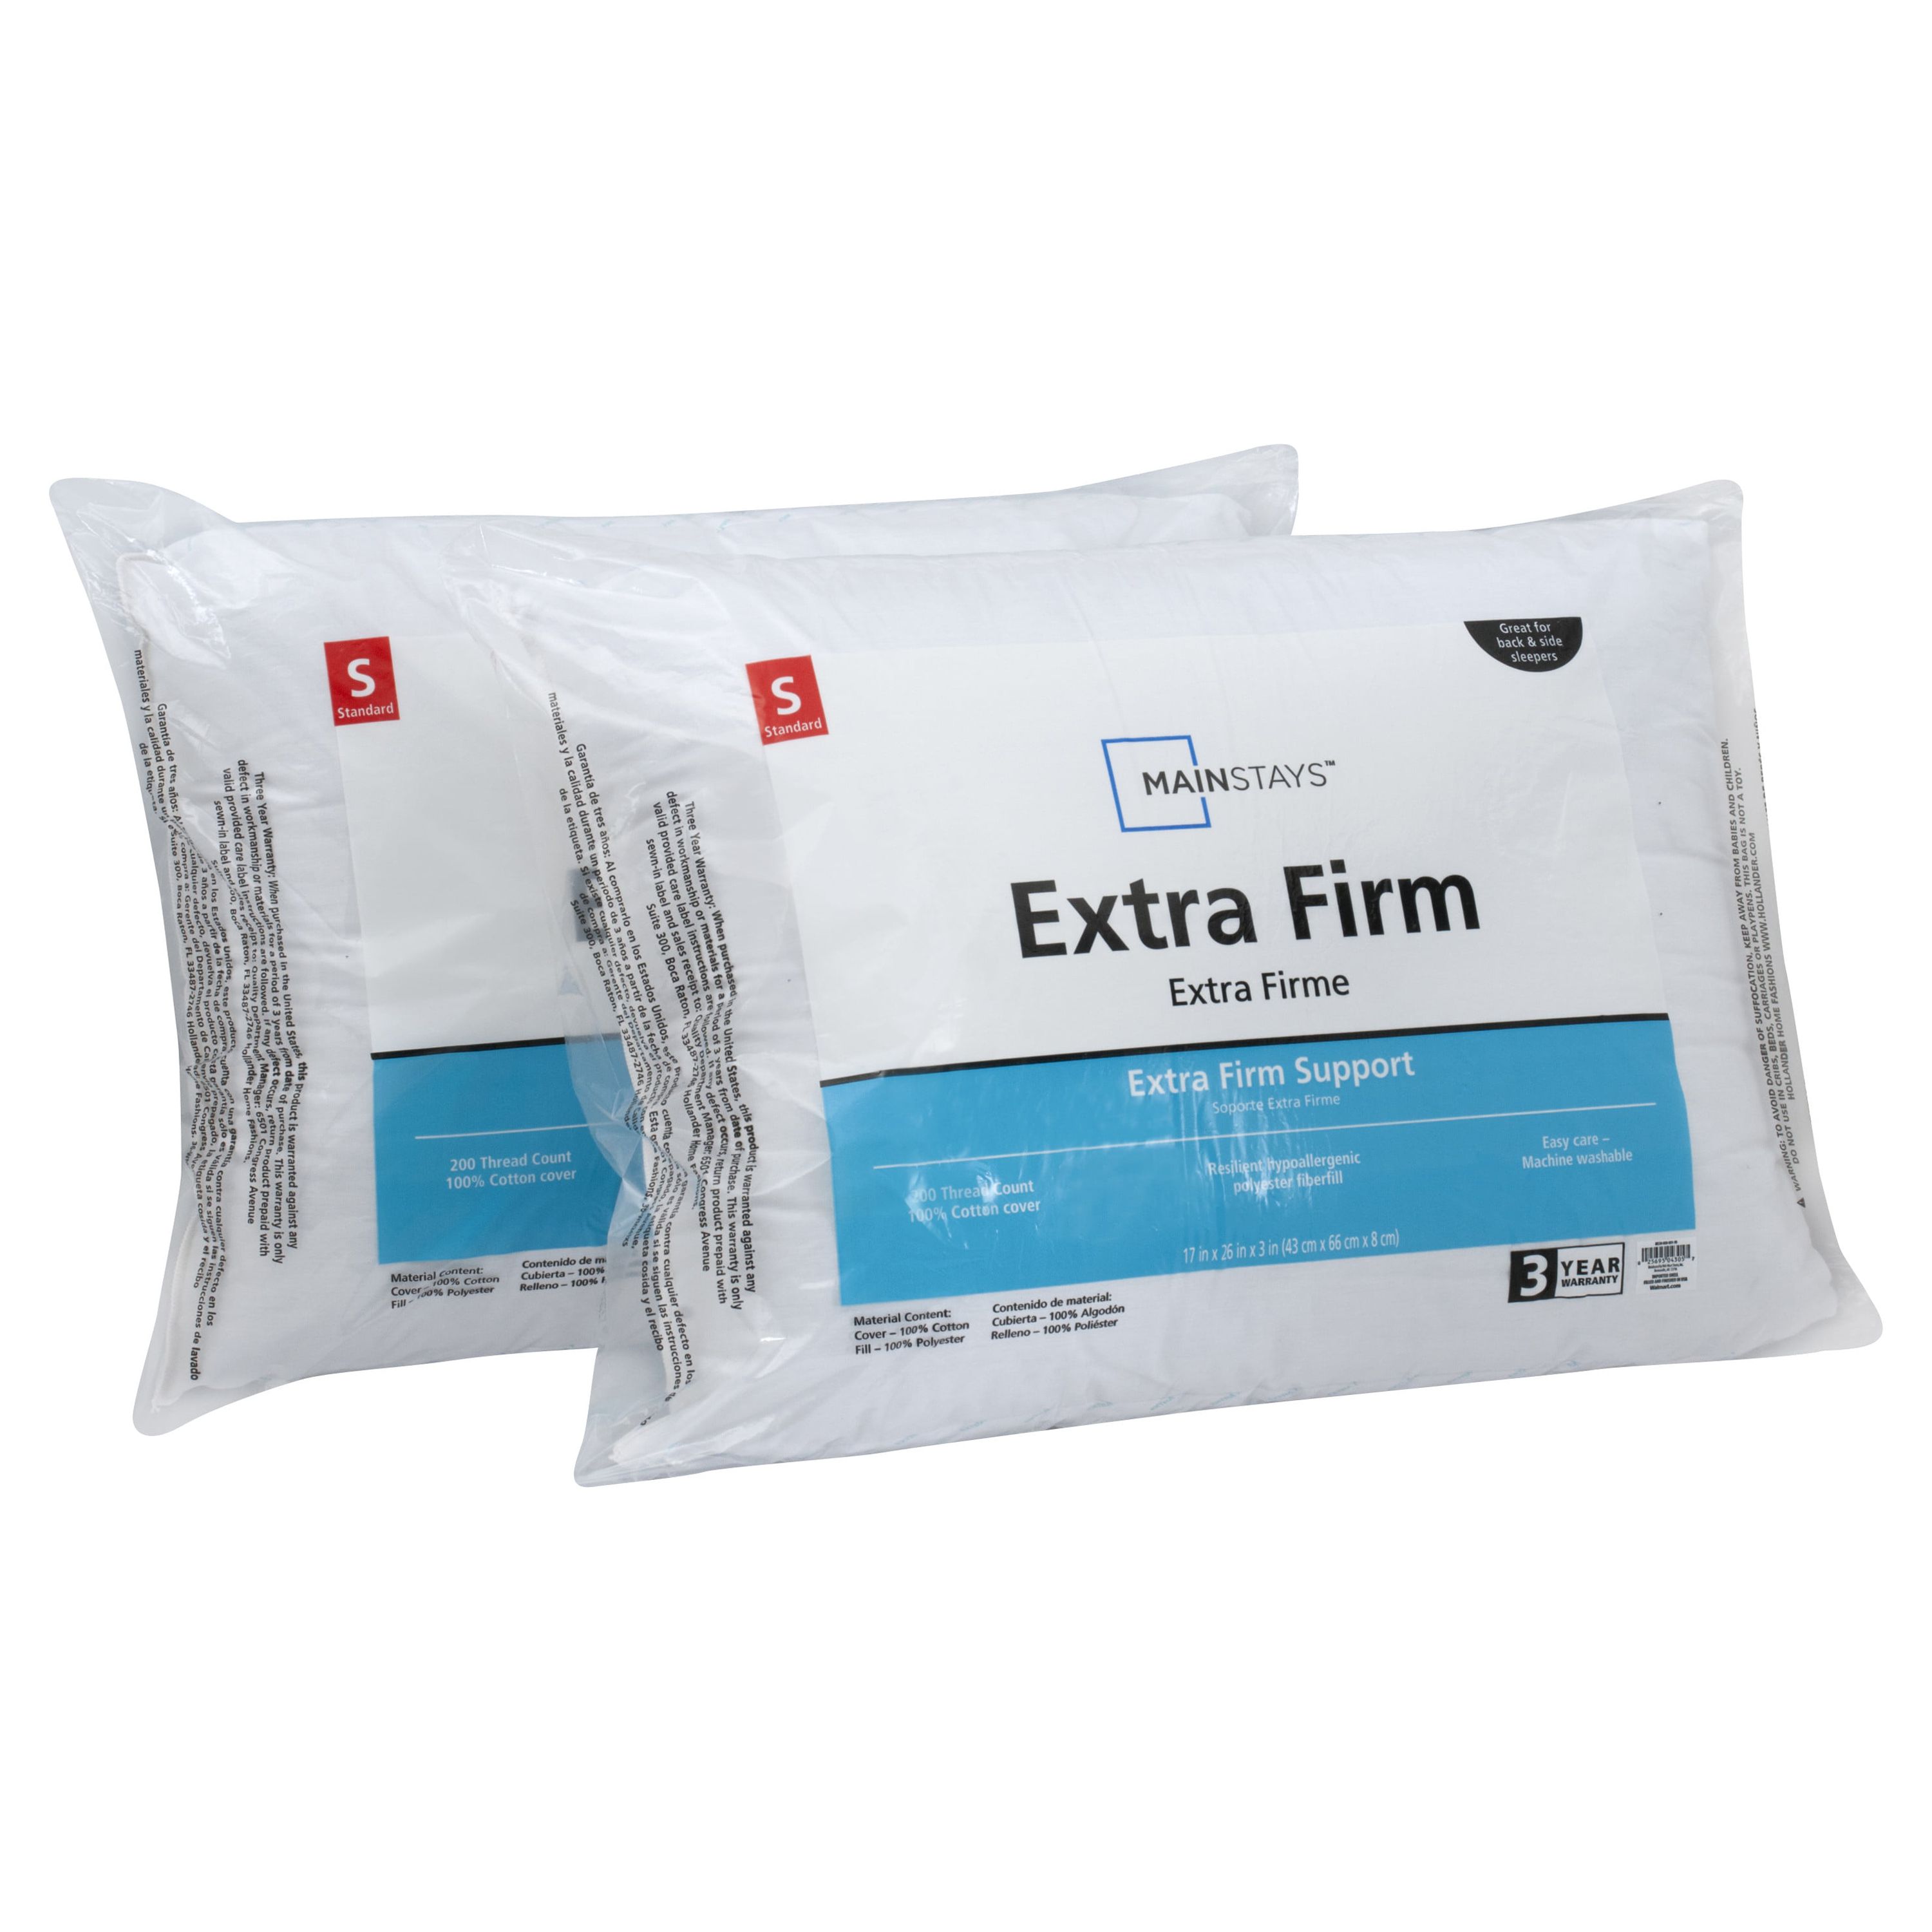 Mainstays Extra Firm Support Pillow, Set of 2, Standard, 200 Thread Count Cotton - image 3 of 7